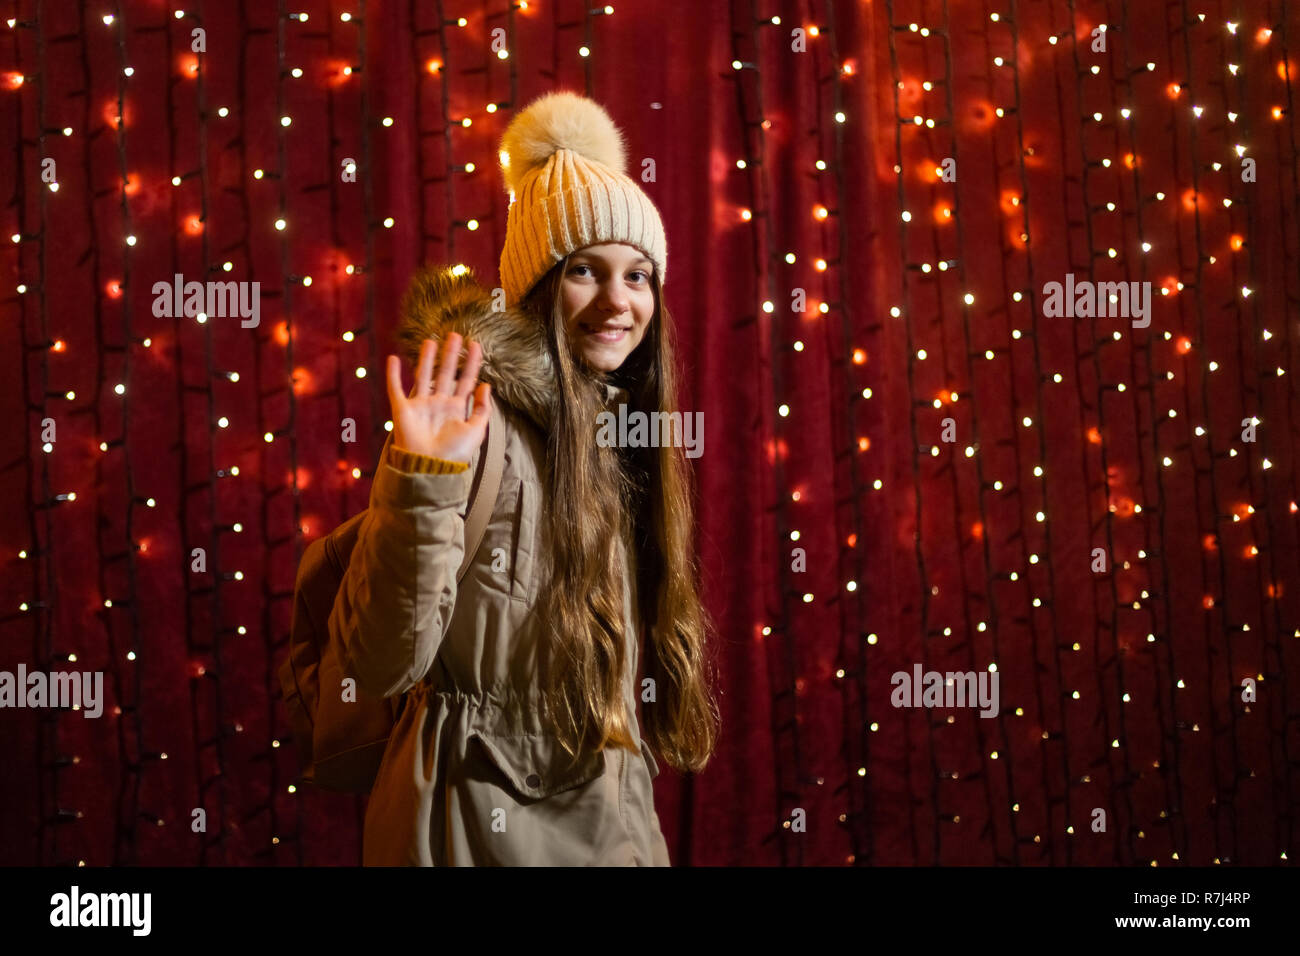 Cute teenager posing and waving in front of lights wall at Christmas market. Stock Photo